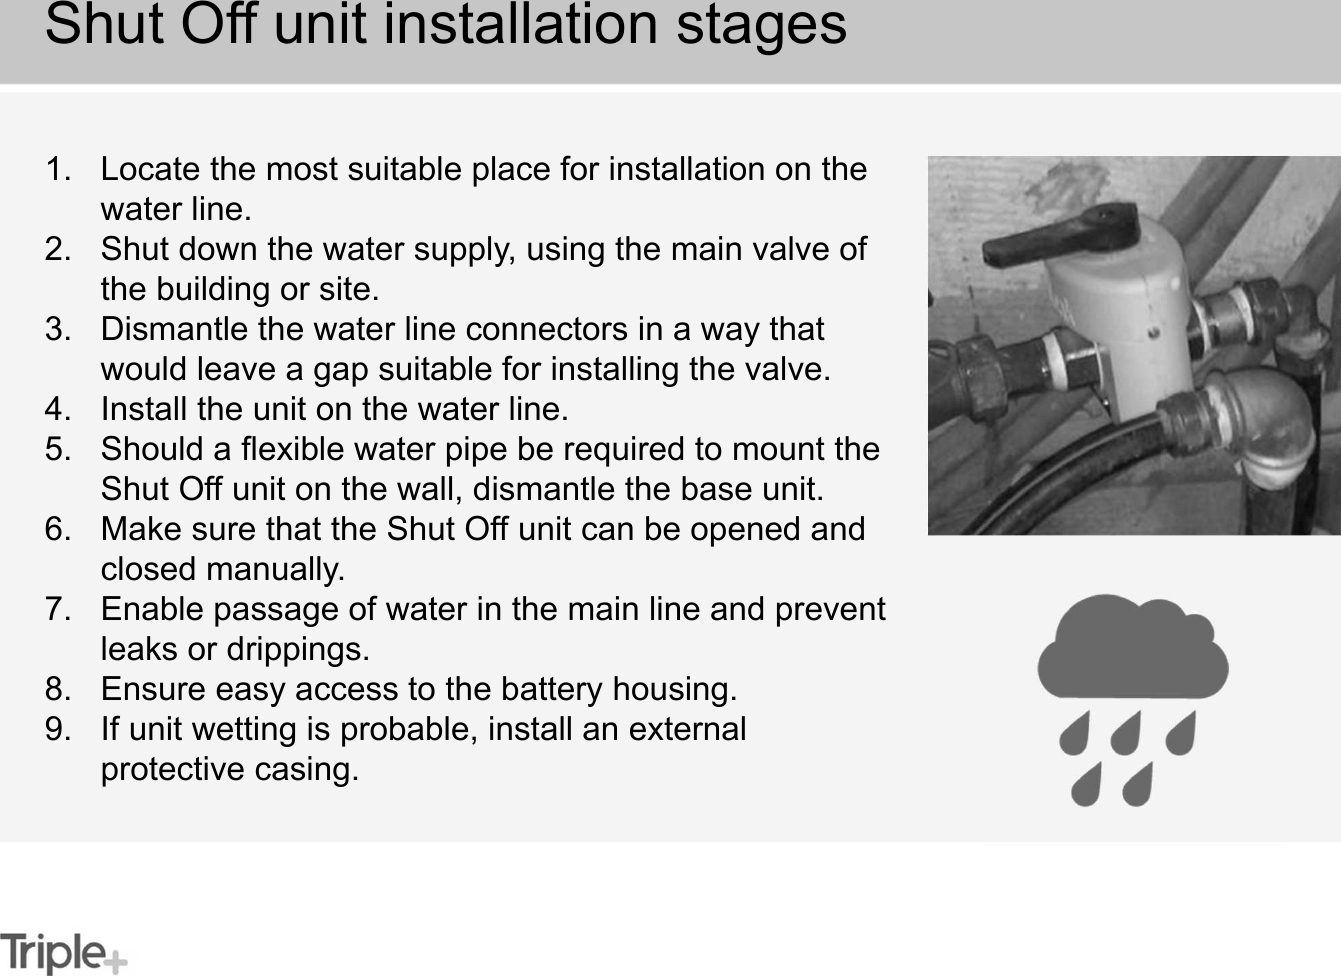 1. Locate the most suitable place for installation on the water line.2. Shut down the water supply, using the main valve of the building or site.3. Dismantle the water line connectors in a way that would leave a gap suitable for installing the valve.4. Install the unit on the water line.5. Should a flexible water pipe be required to mount the Shut Off unit on the wall, dismantle the base unit.6. Make sure that the Shut Off unit can be opened and closed manually.7. Enable passage of water in the main line and prevent leaks or drippings.8. Ensure easy access to the battery housing.9. If unit wetting is probable, install an external protective casing.Shut Off unit installation stages